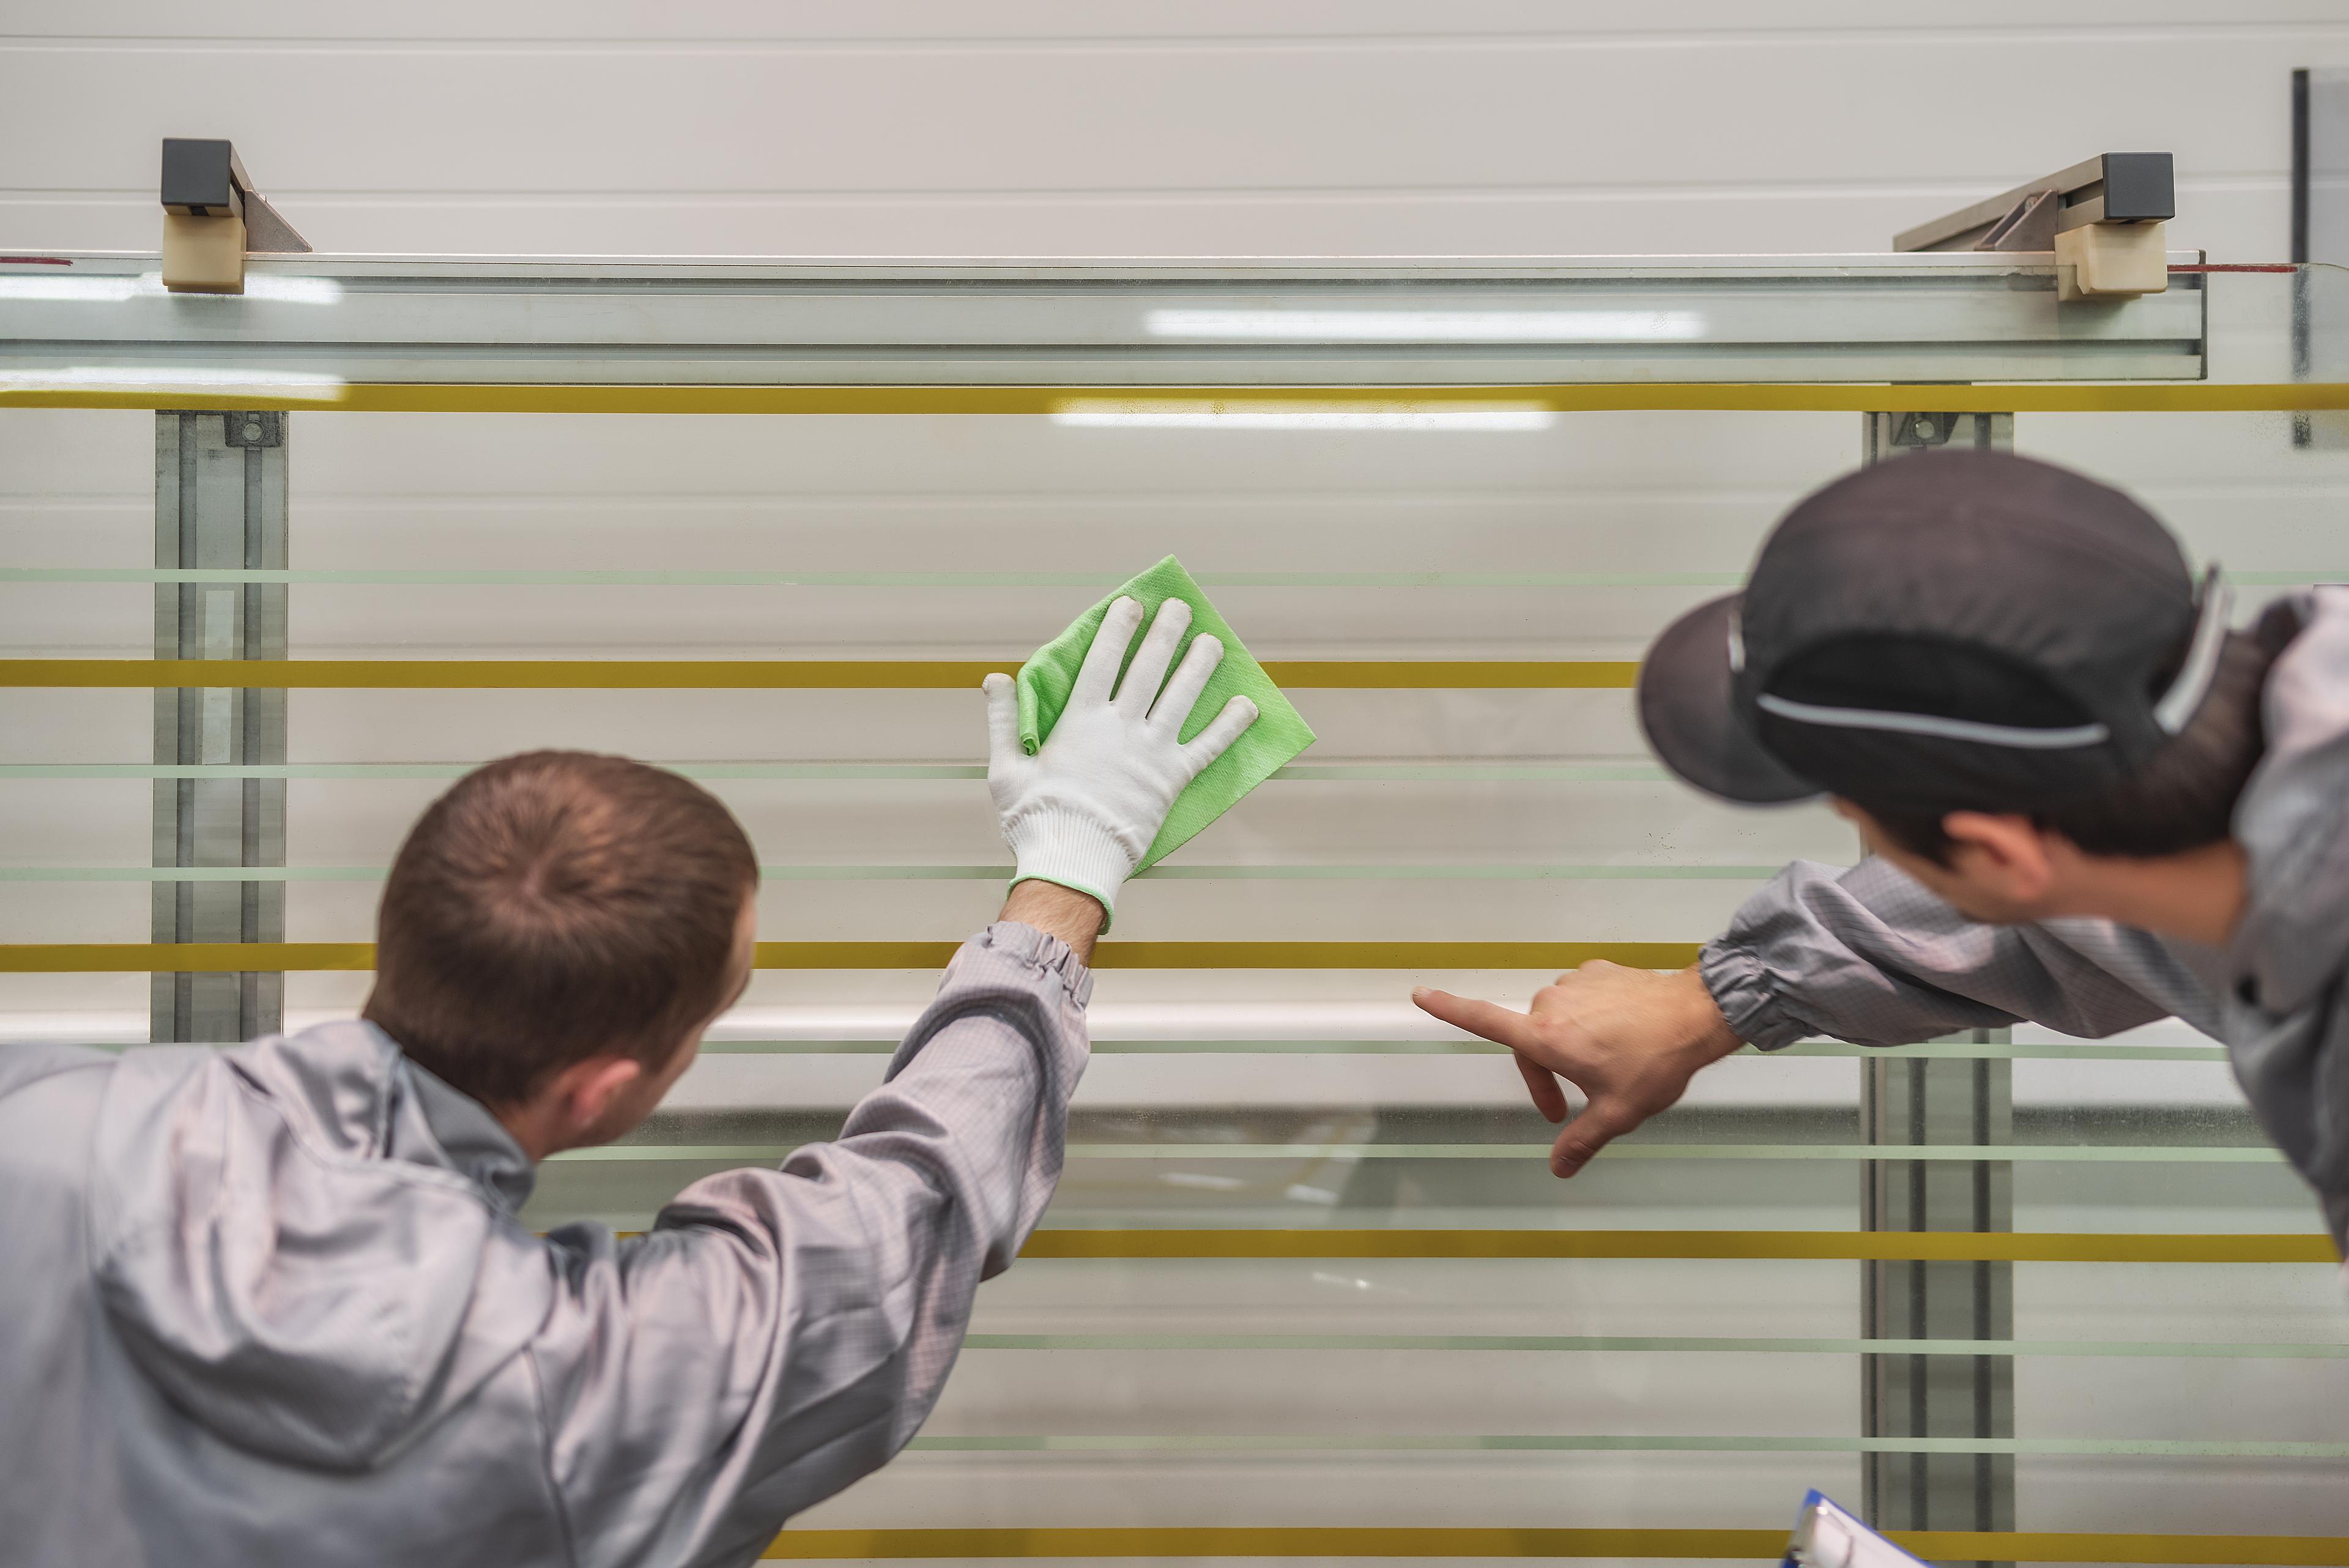 two cleaning team members work together to carefully clean glass in office building.